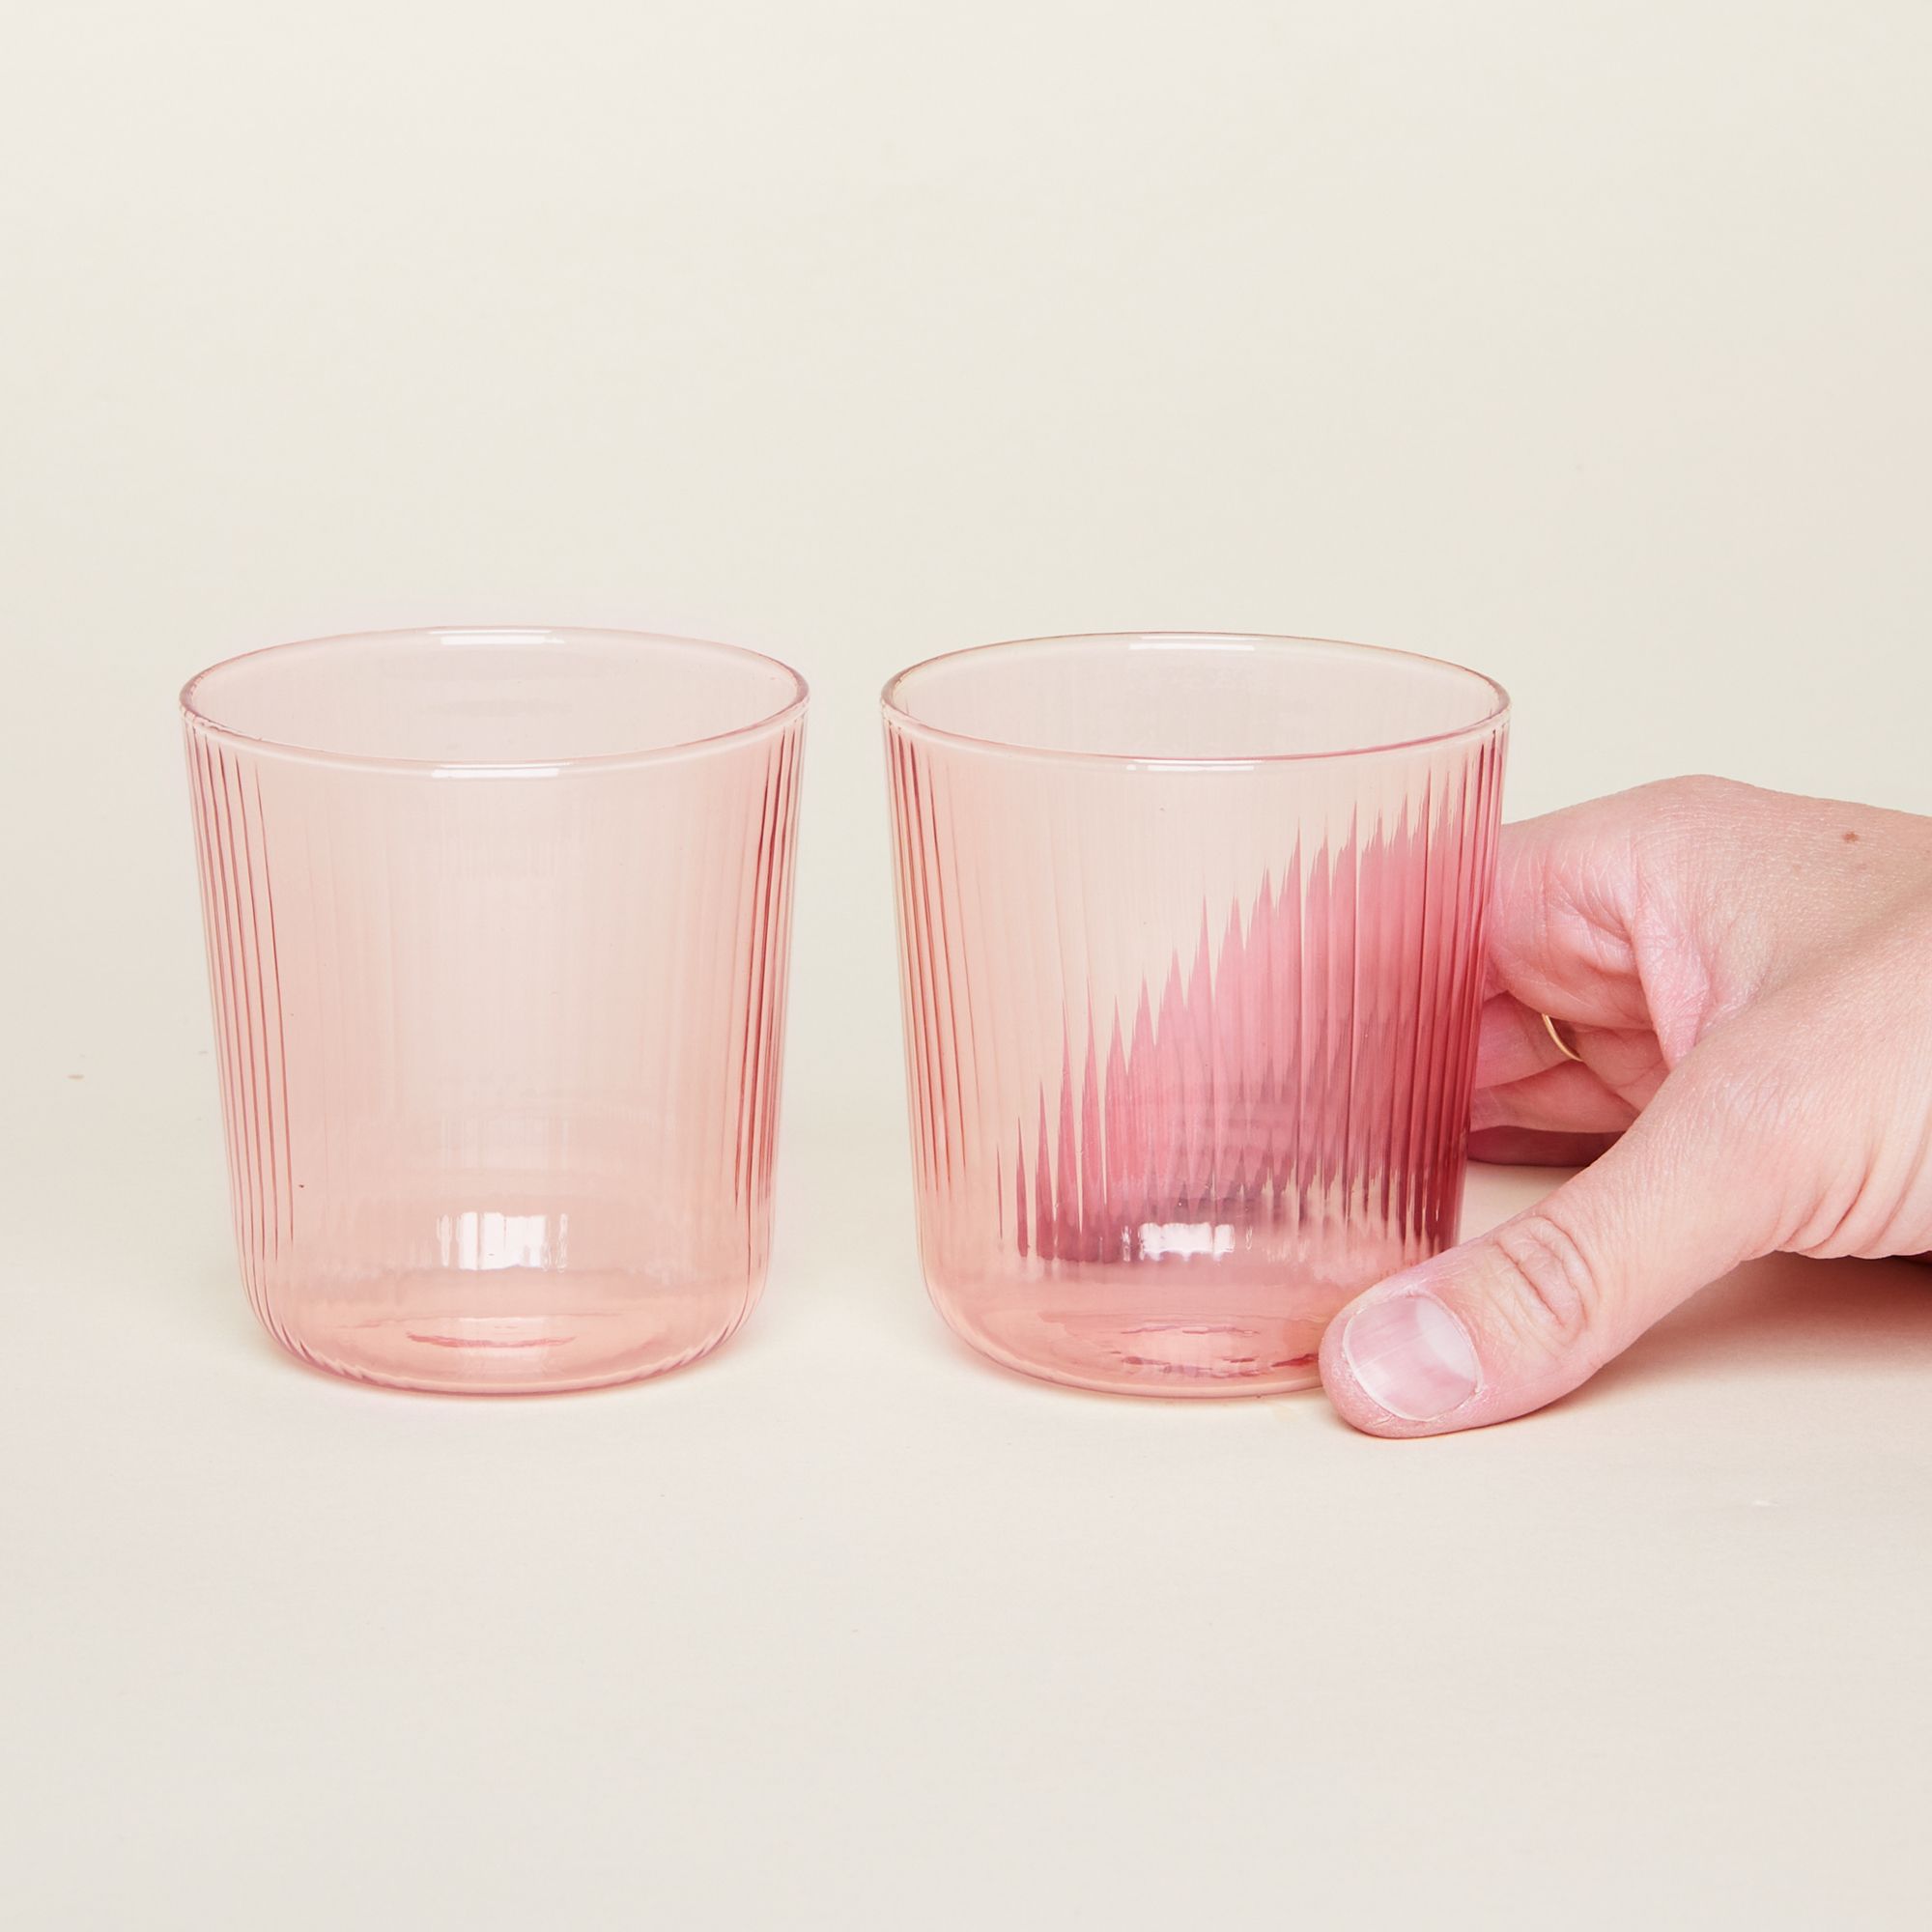 Stemless wine glasses with vertical grooves in three slightly translucent and sensational colors: sand, citrine green and hot pink.